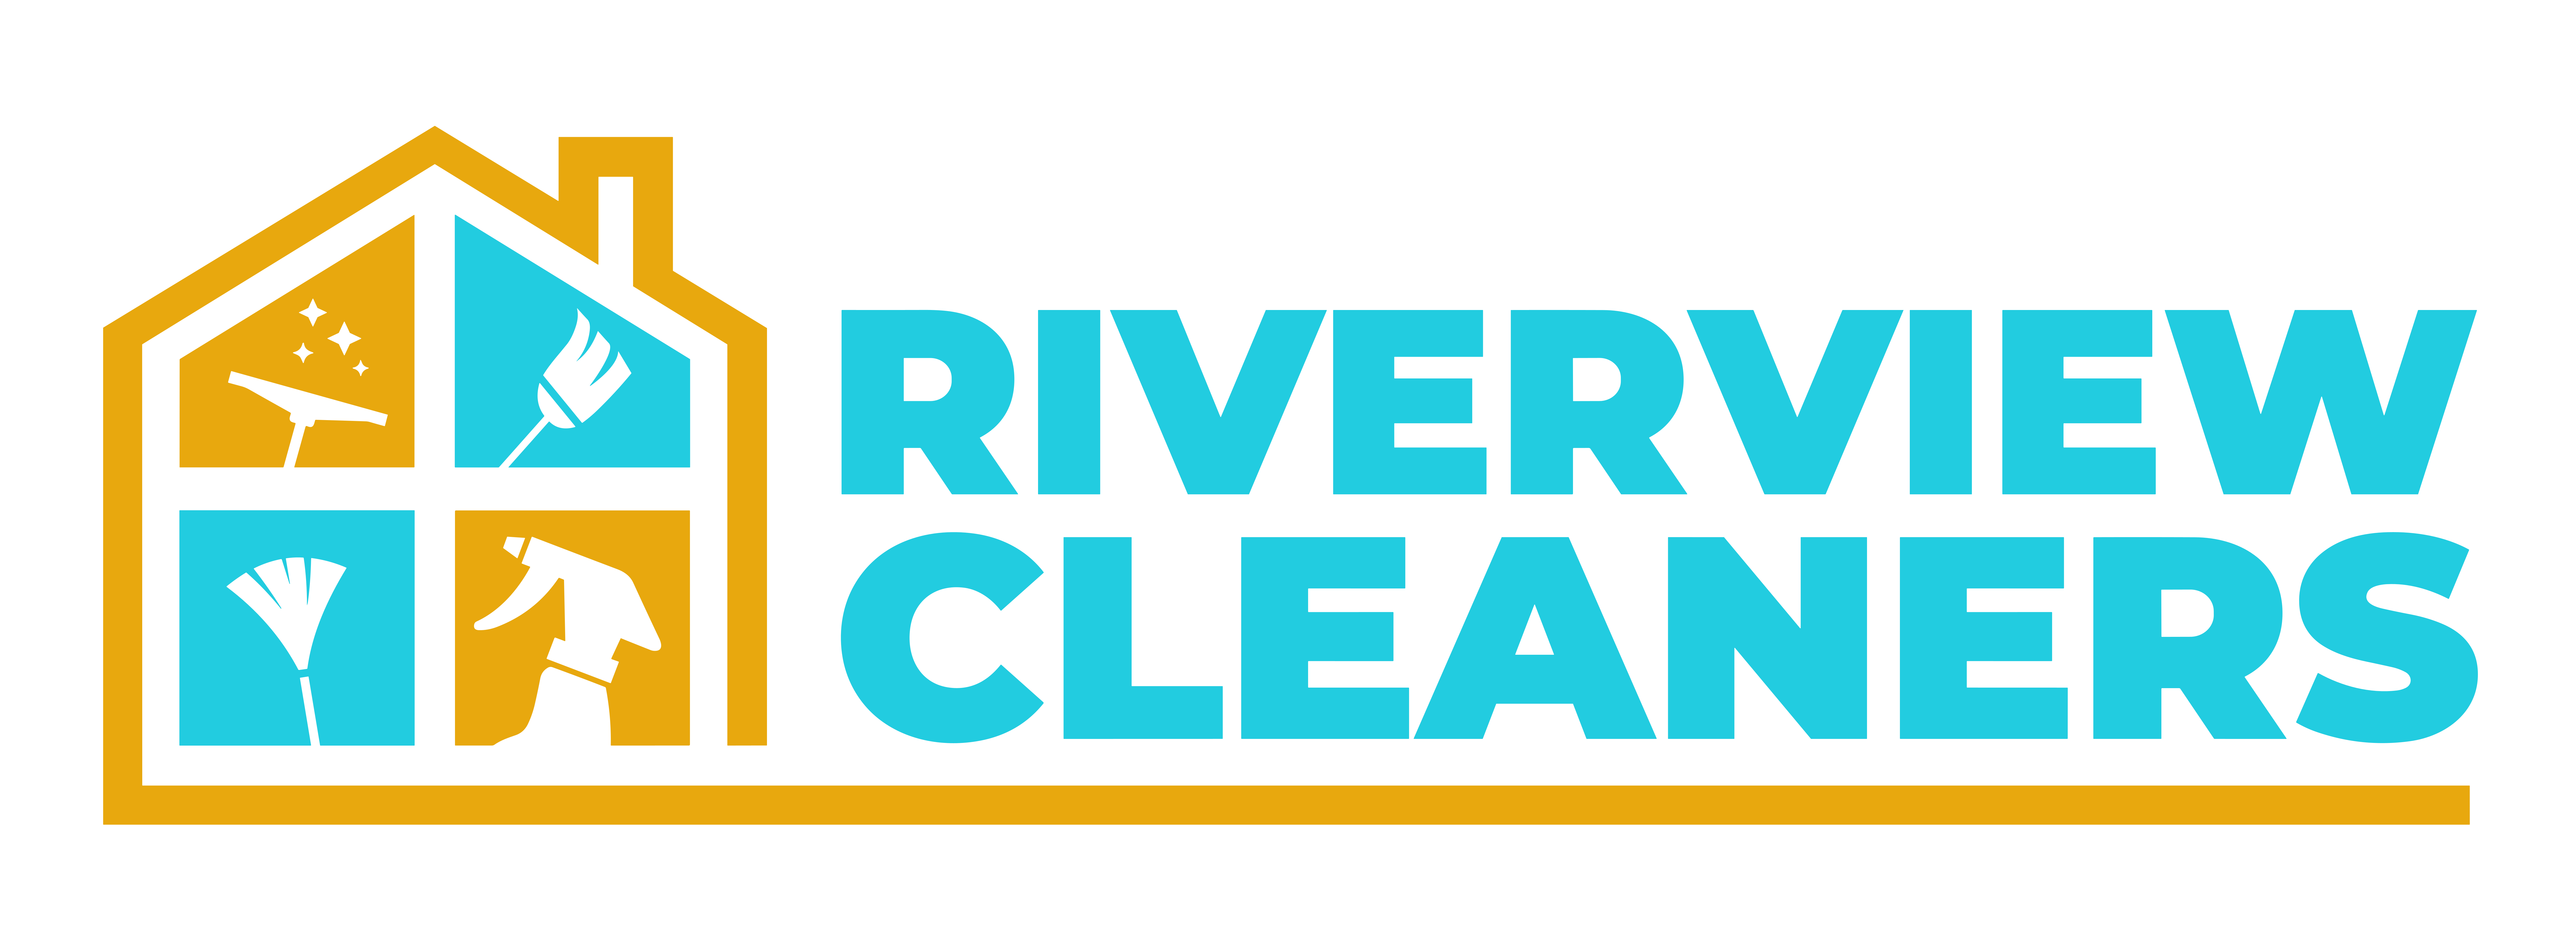 RiverView-cleaners.png